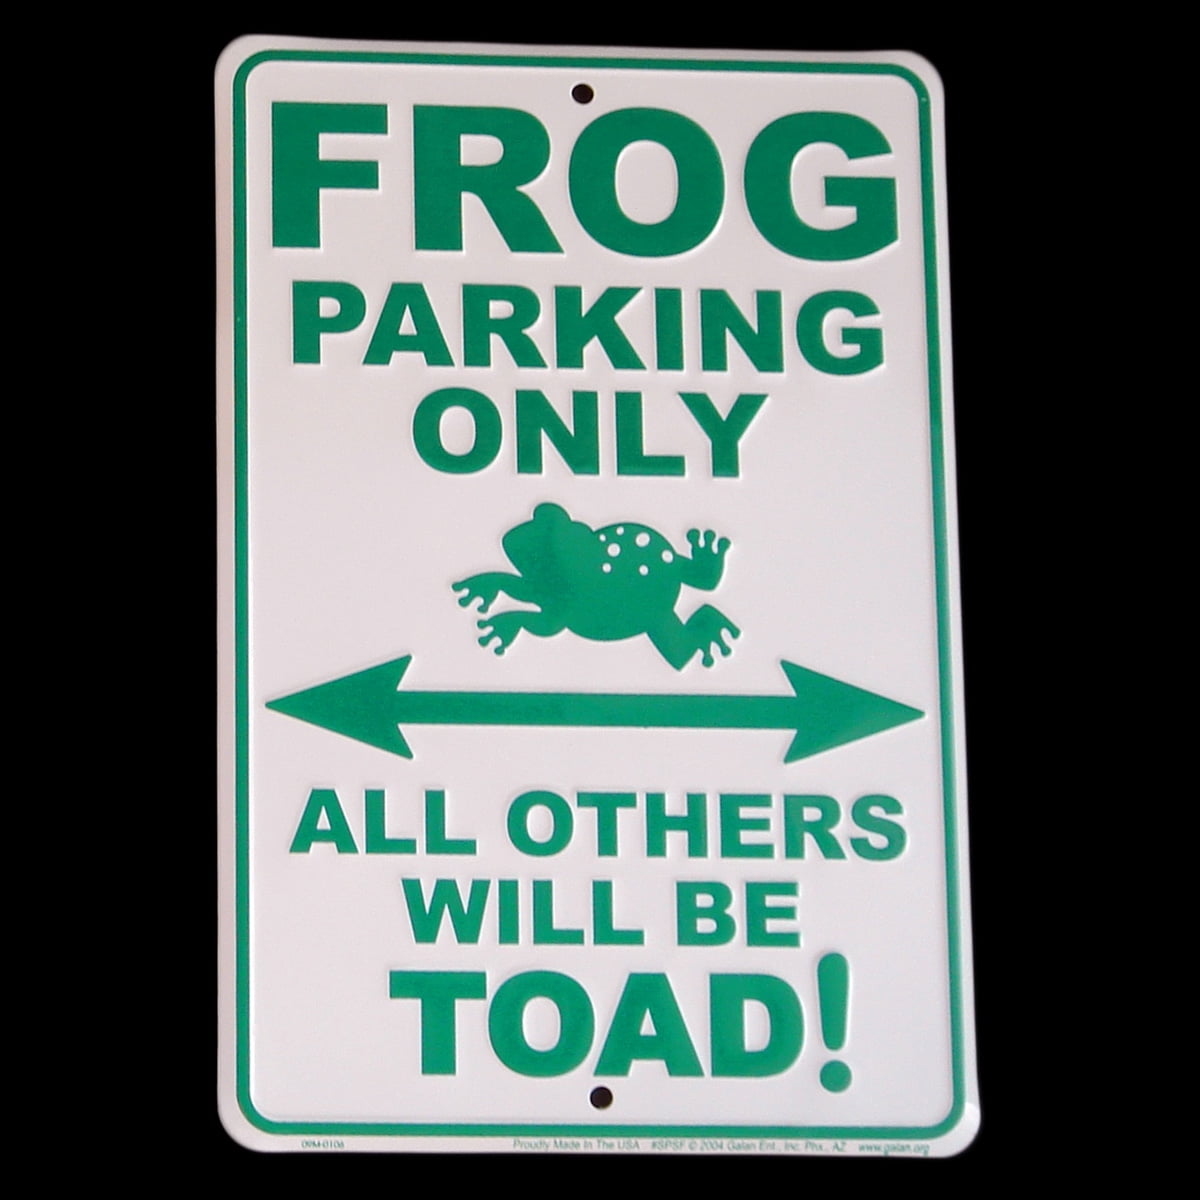 Frog Parking Only Violators Will Be Towed Novelty Funny Metal Sign 8 in x 12 in